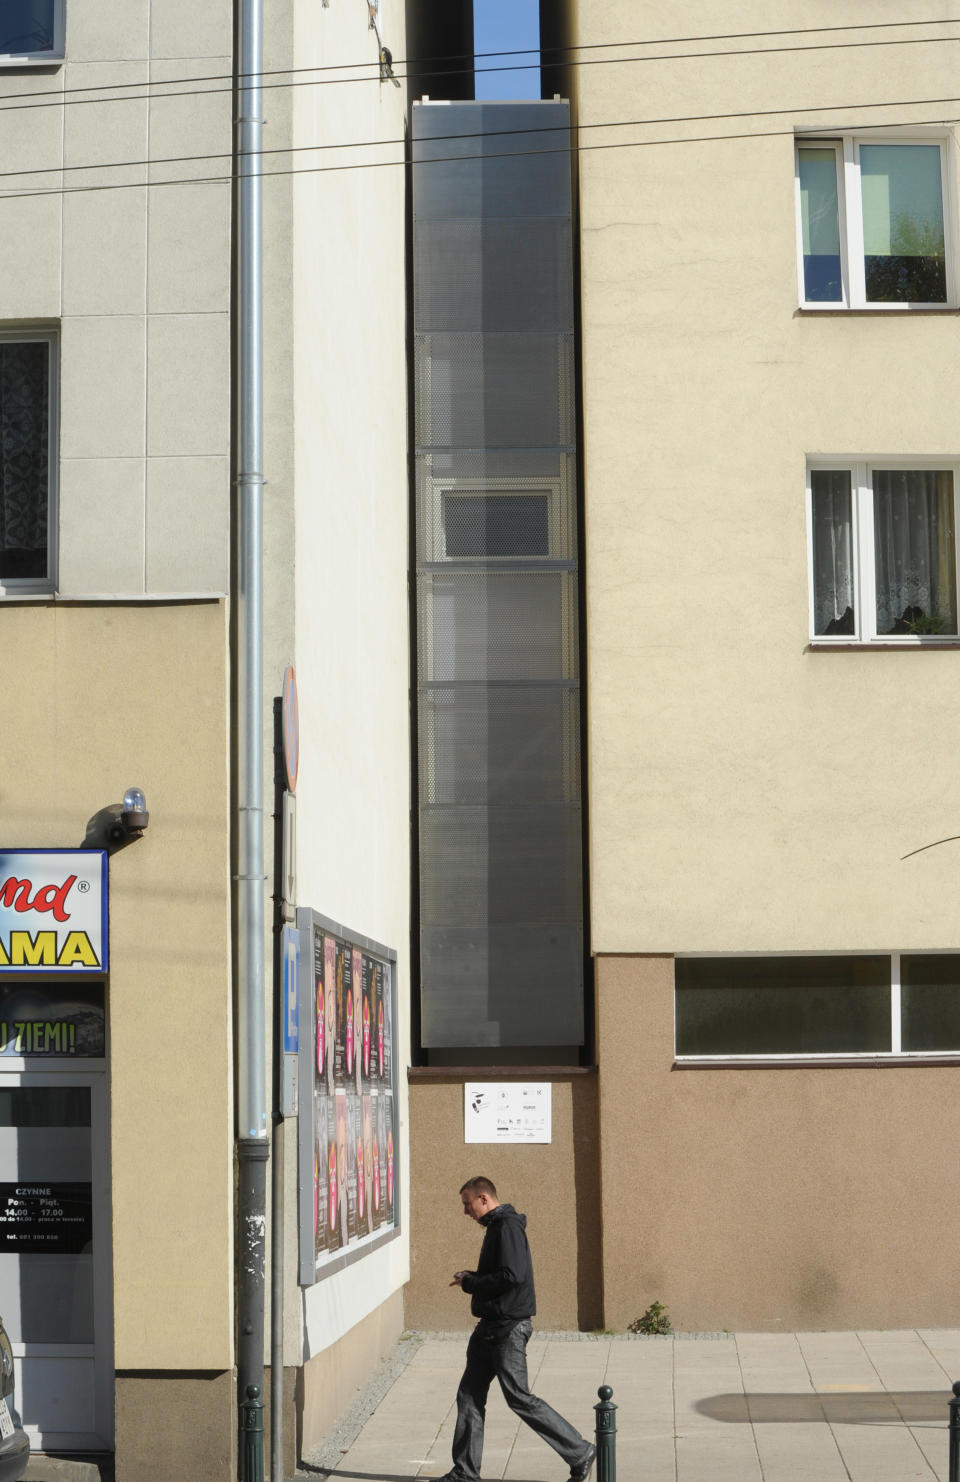 A passerby walks past one of the world’s narrowest houses, in Warsaw, Poland, Friday, Oct. 19, 2012. The two-level “Keret’s House” is no wider than 122 centimeters (48.03 inches) and was fitted into tiny space puzzlingly left between a pre-war house and a modern apartment block of the 1960s in downtown Warsaw. It is named after Etgar Keret, an Israeli writer of Polish roots who will be the first inhabitant of this artistic project of aluminum and polycarbonate. (AP Photo/Alik Keplicz)